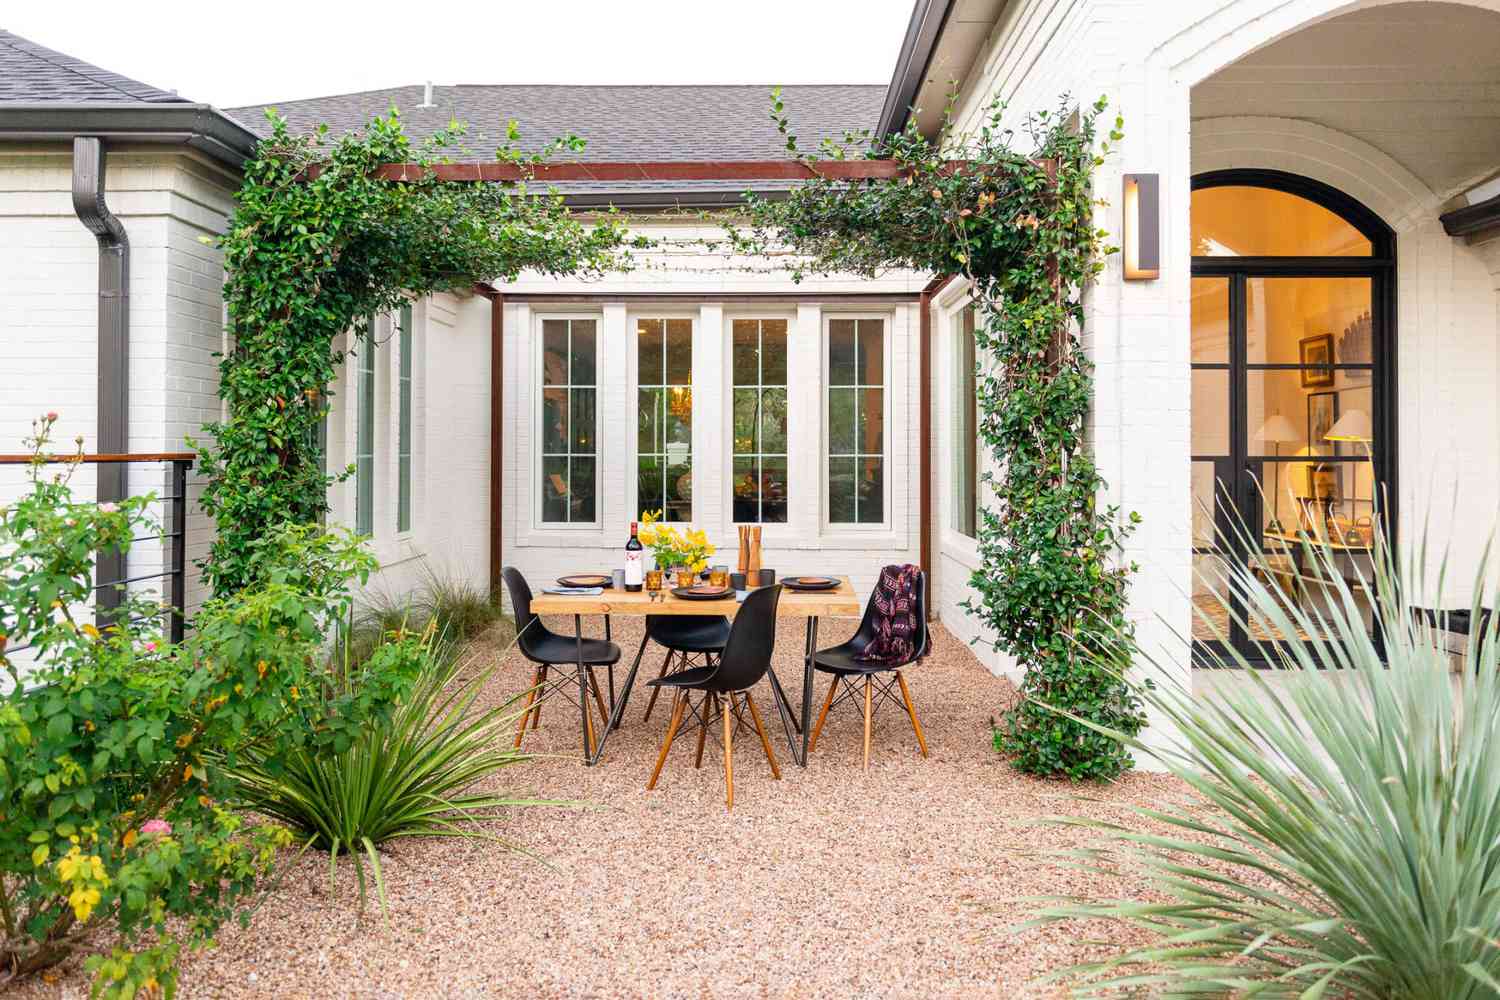 6 Garden Ideas That Will Boost the Value of Your Home